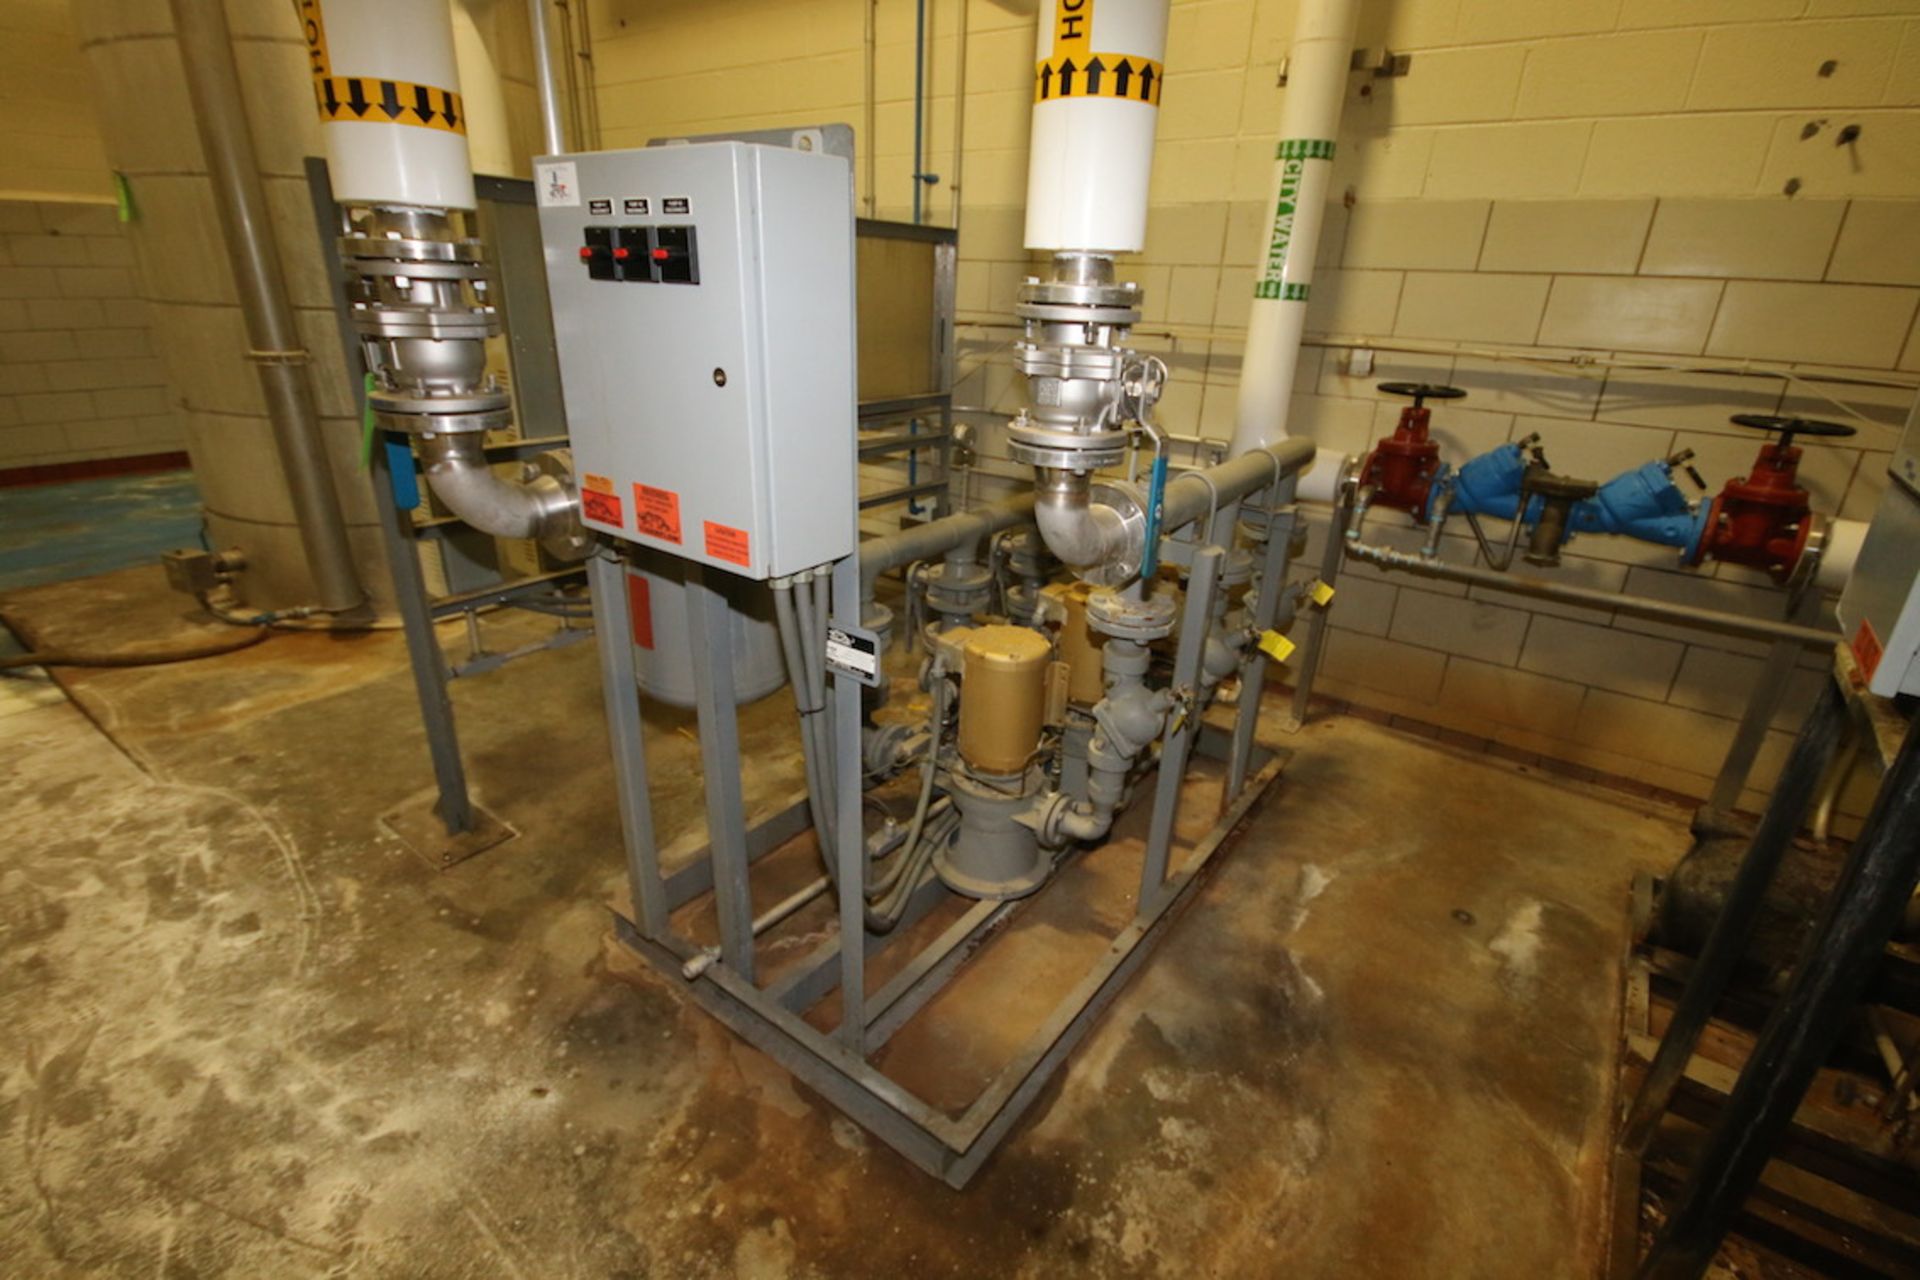 2011 Hot Water Circulation System with Alfa Laval Plate Frame -Tigerflow Skid Mounted Boiler Feed - Image 4 of 6